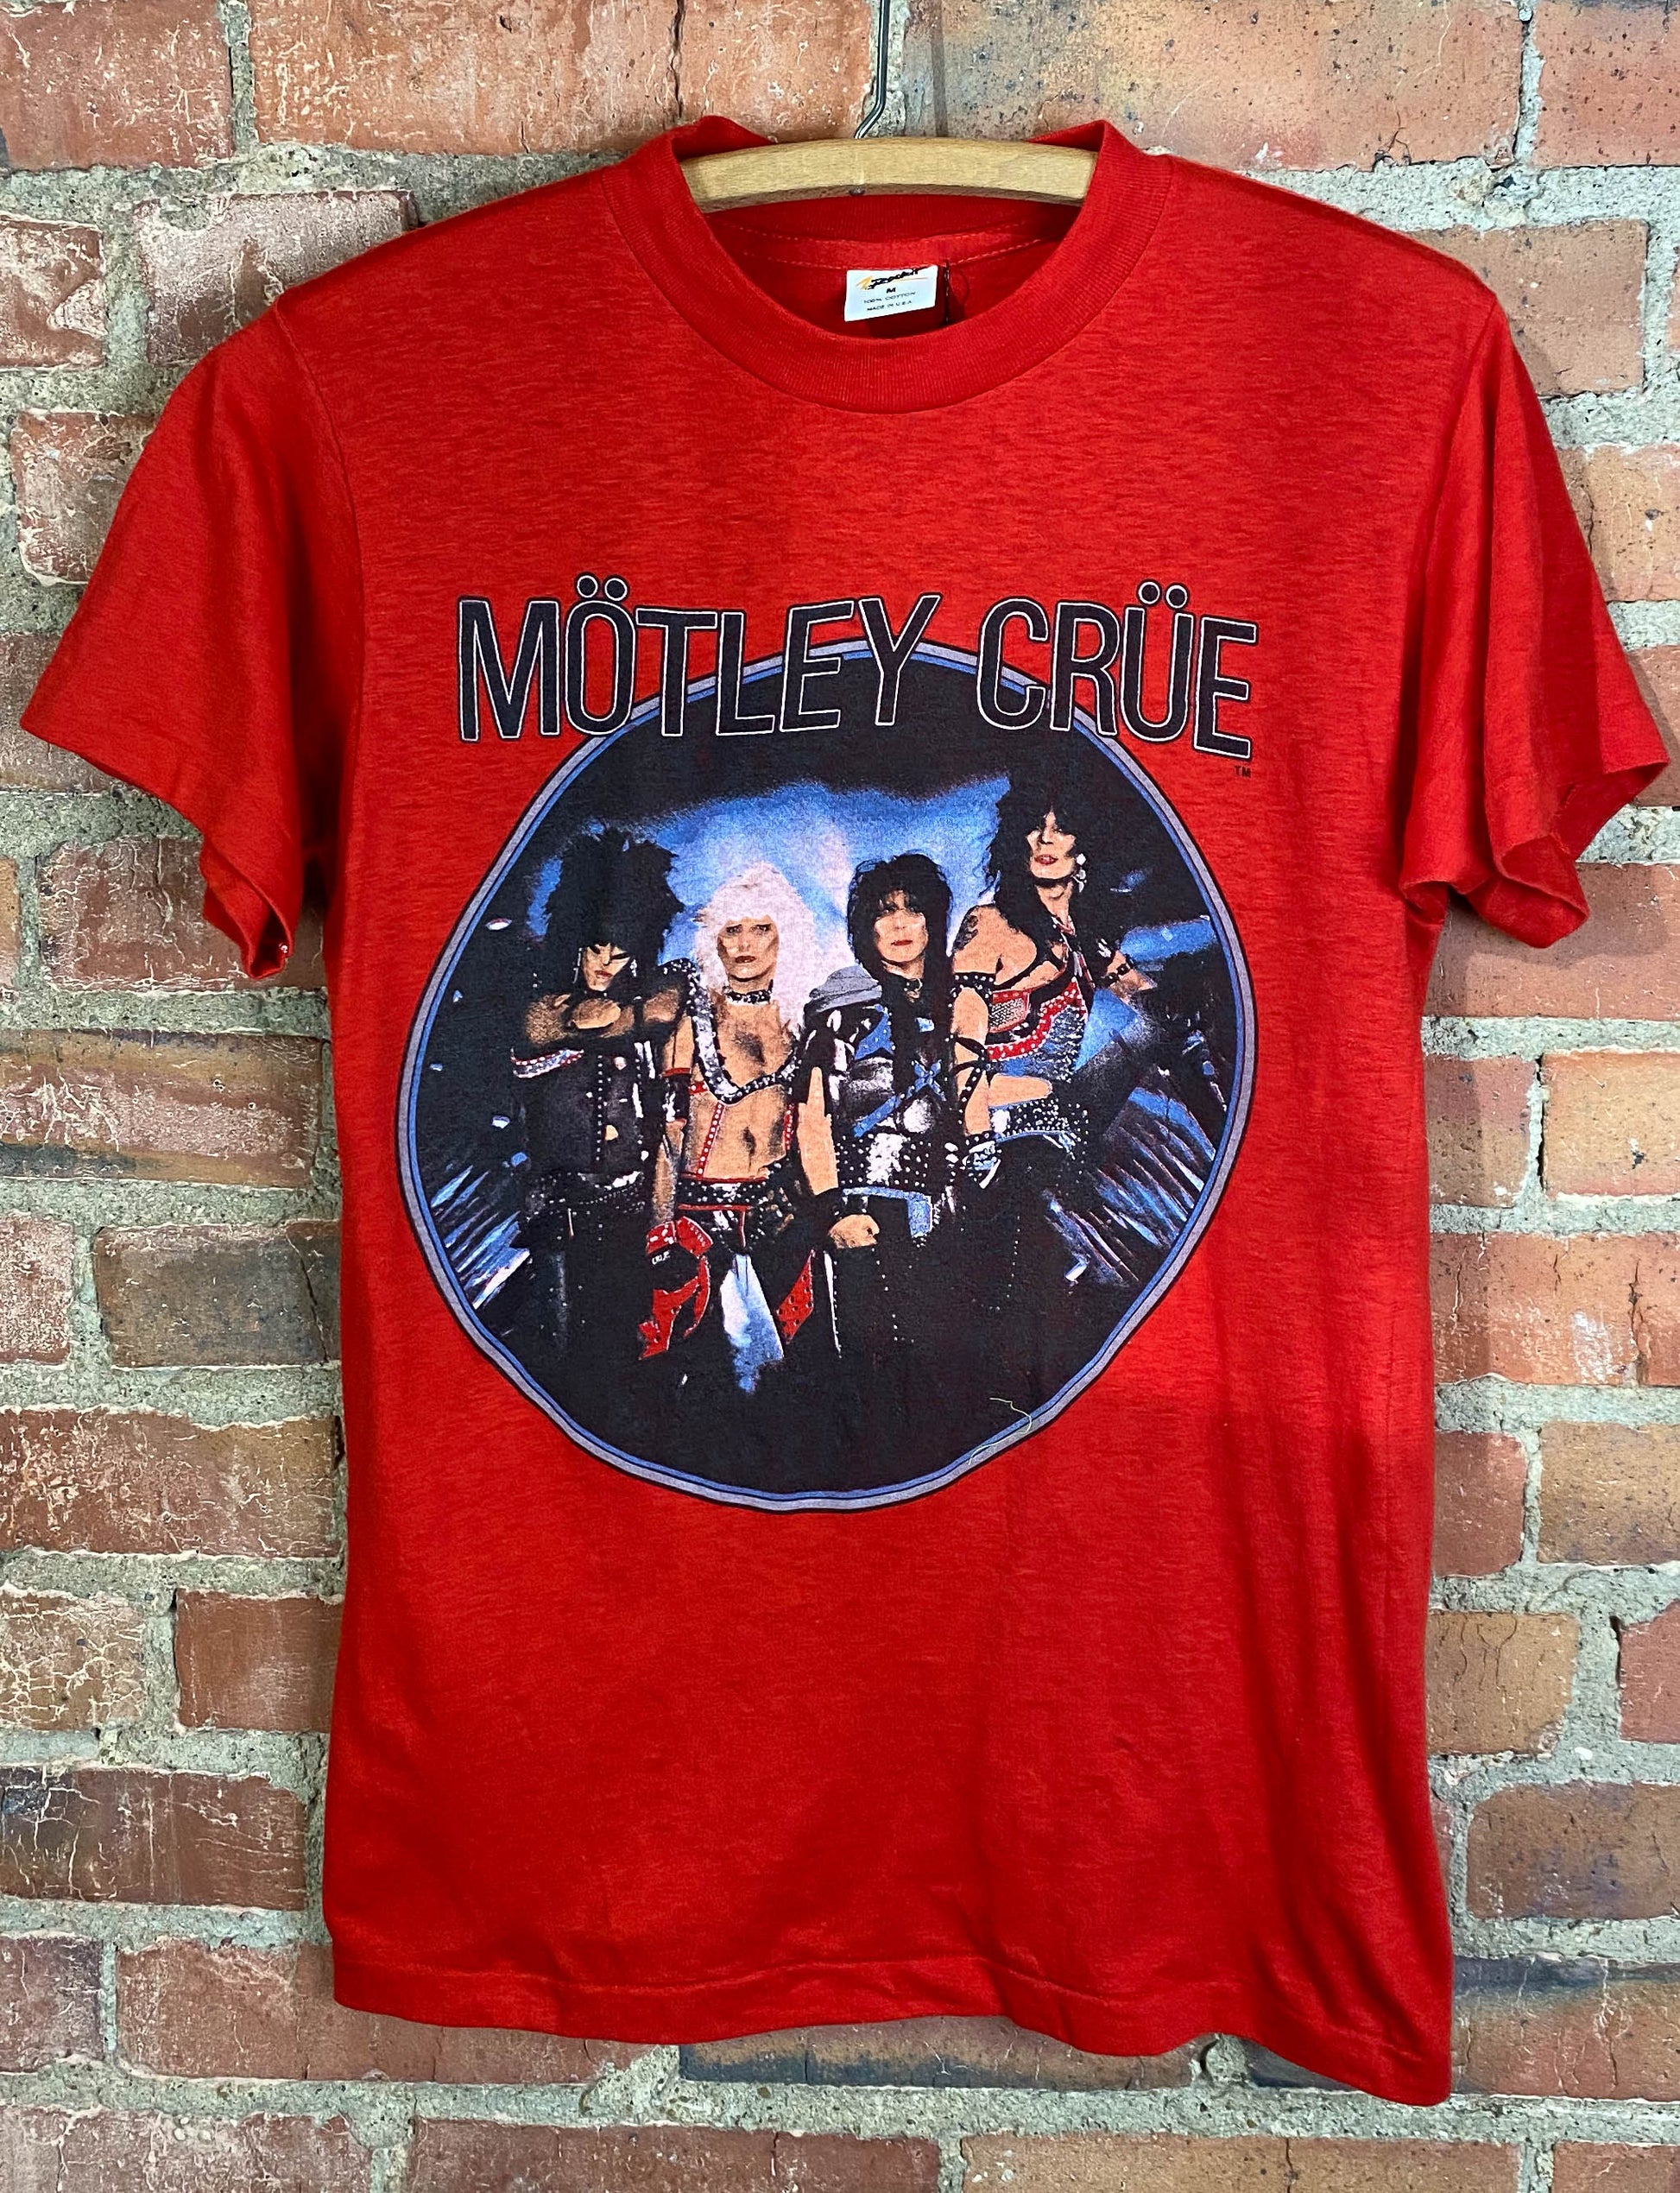 Vintage 1983 Motley Crue Concert T Shirt Shout At The Devil Deadstock Red Unisex Small